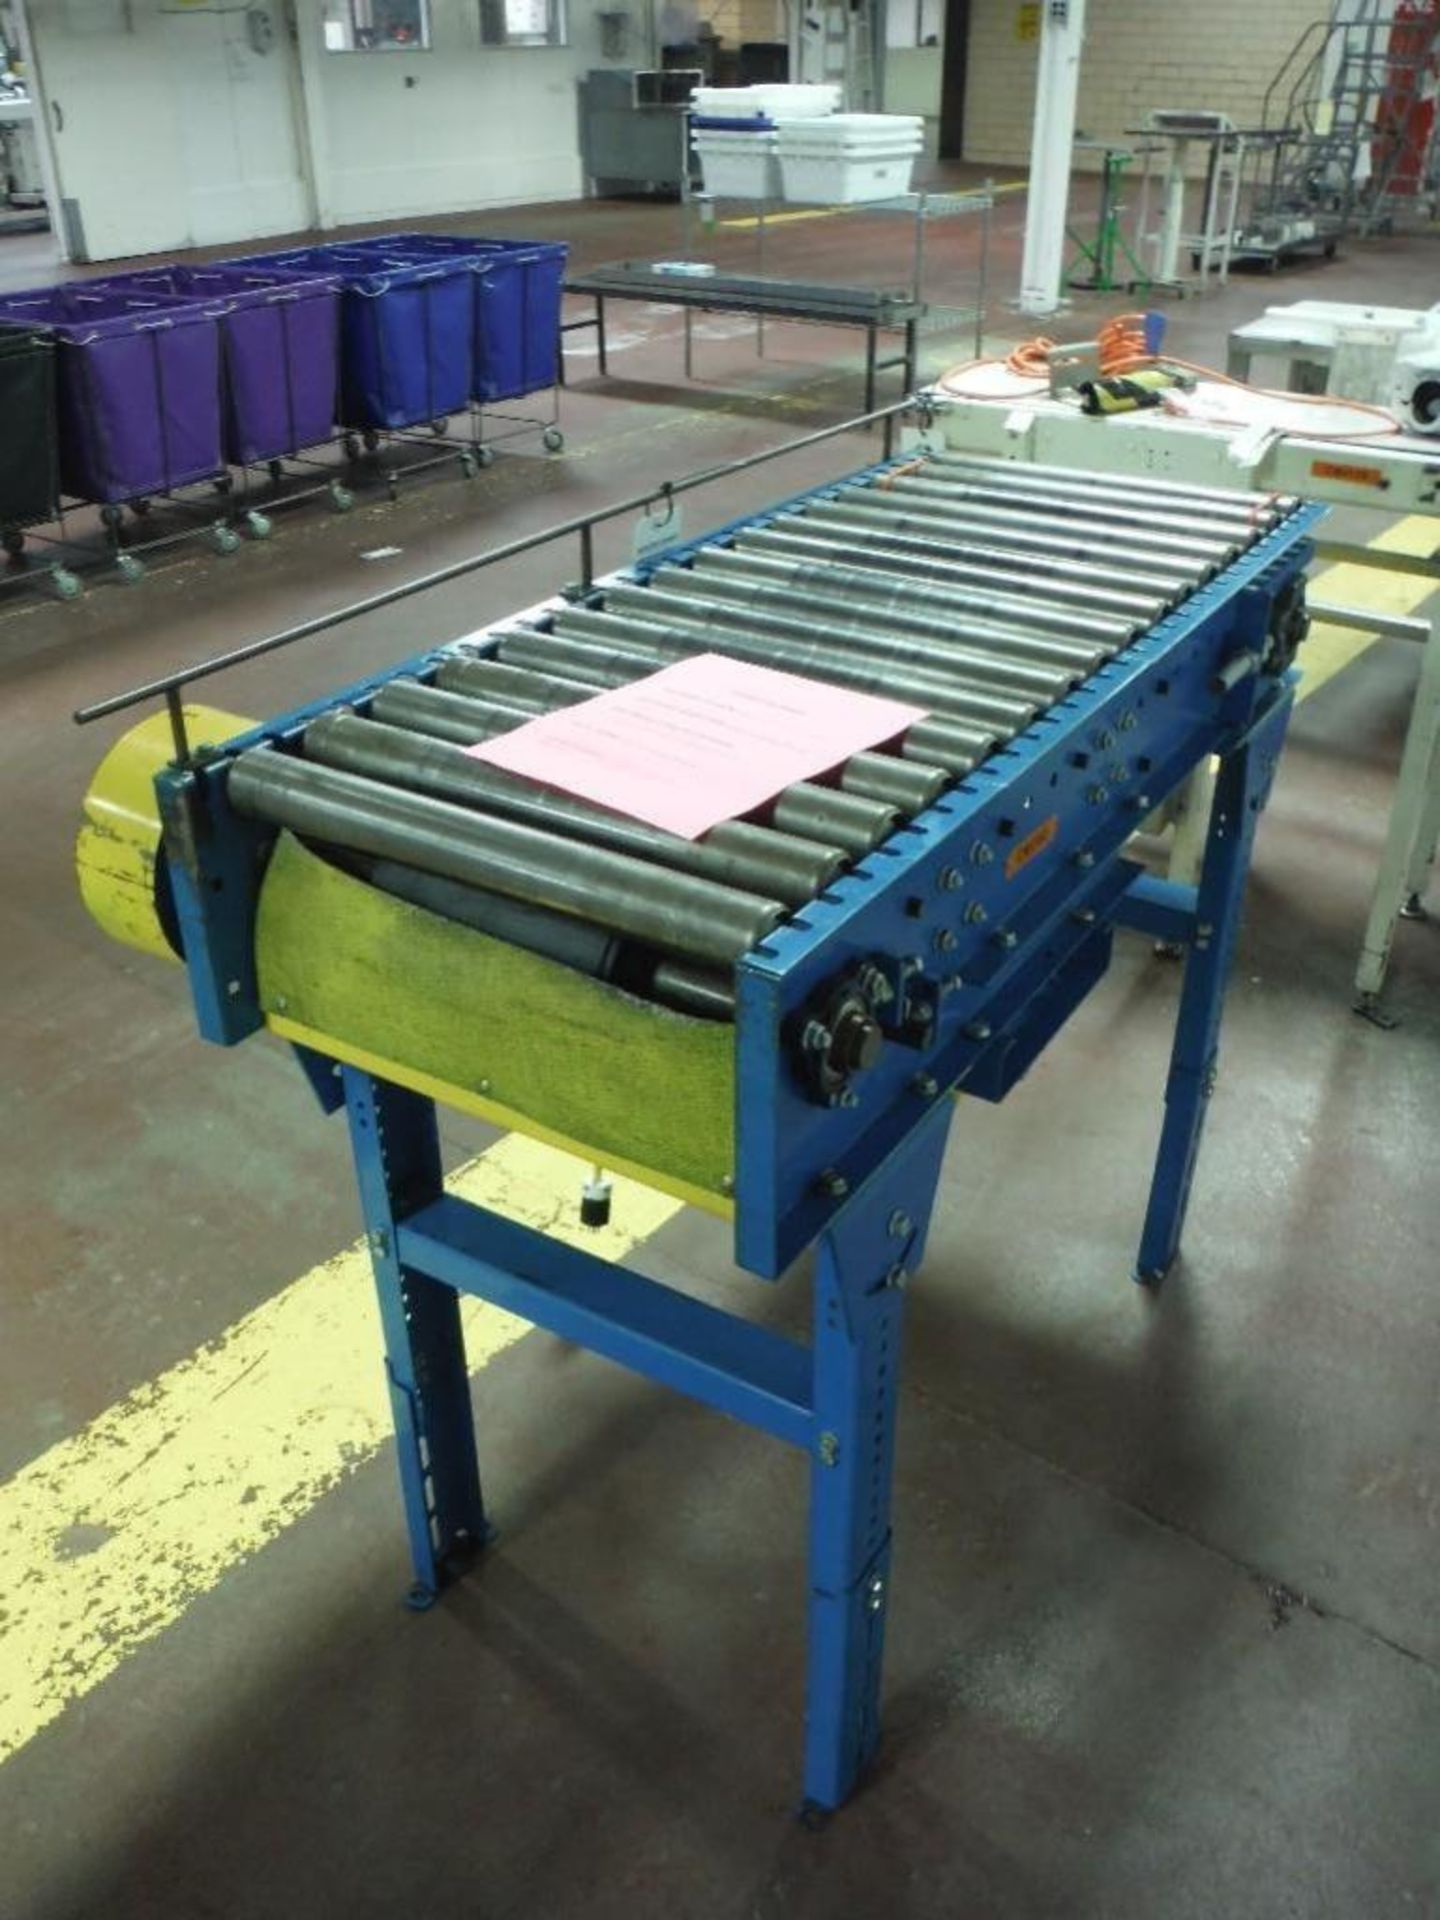 New London powered roller conveyor, 48 in. long x 16 in. wide rollers, motor and drive, steel frame - Image 3 of 6